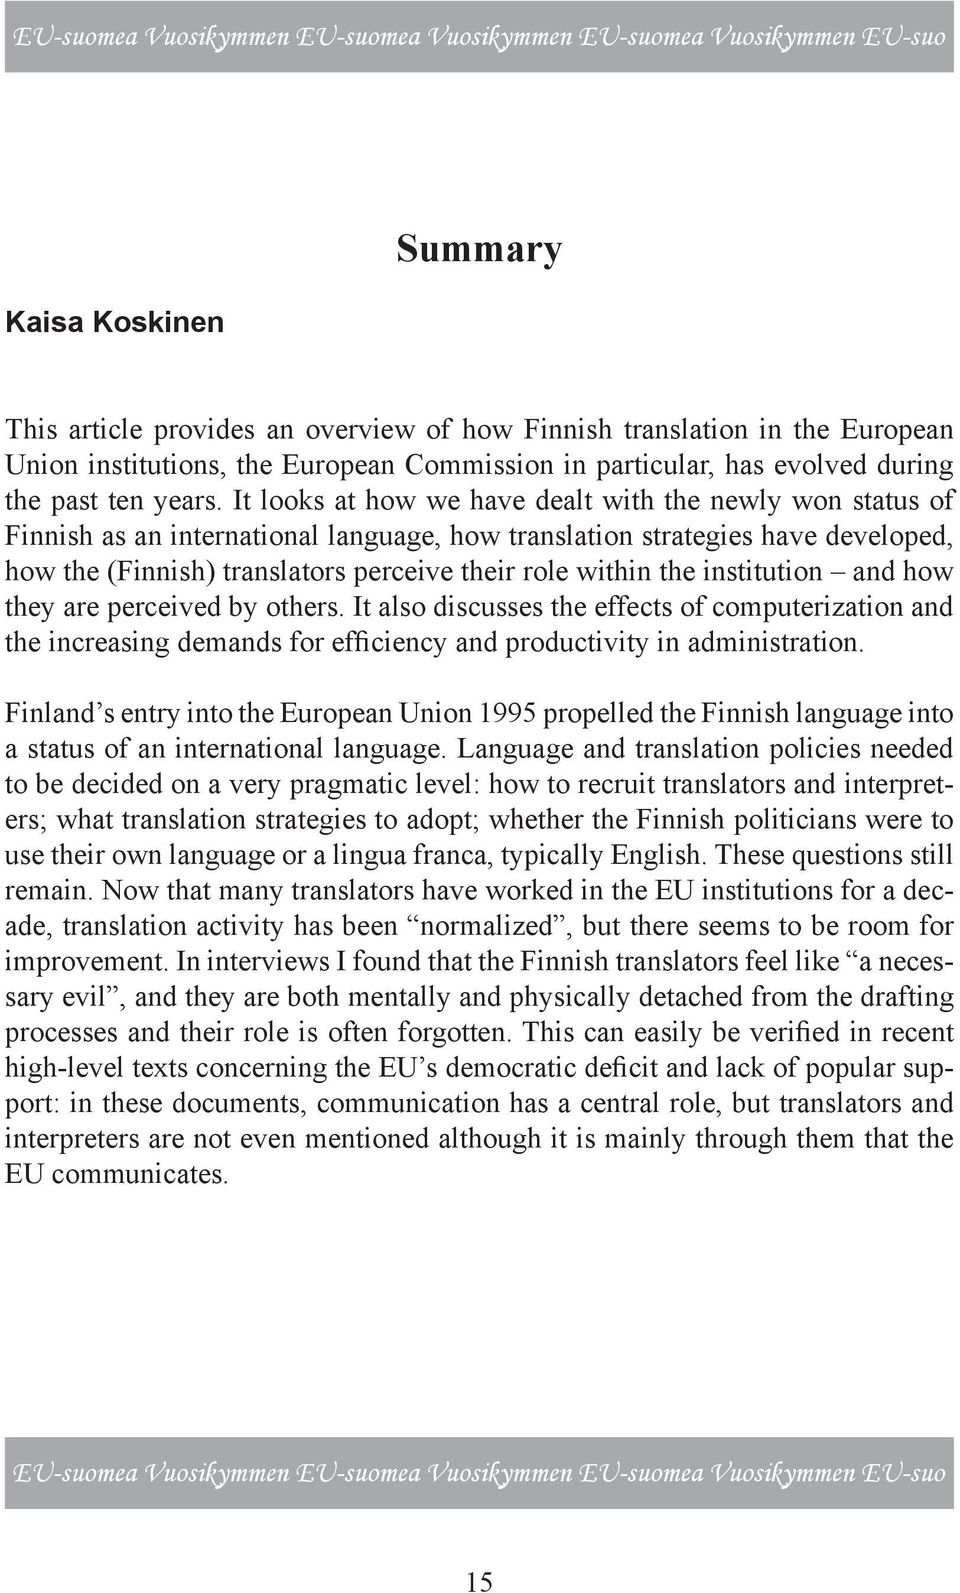 It looks at how we have dealt with the newly won status of Finnish as an international language, how translation strategies have developed, how the (Finnish) translators perceive their role within